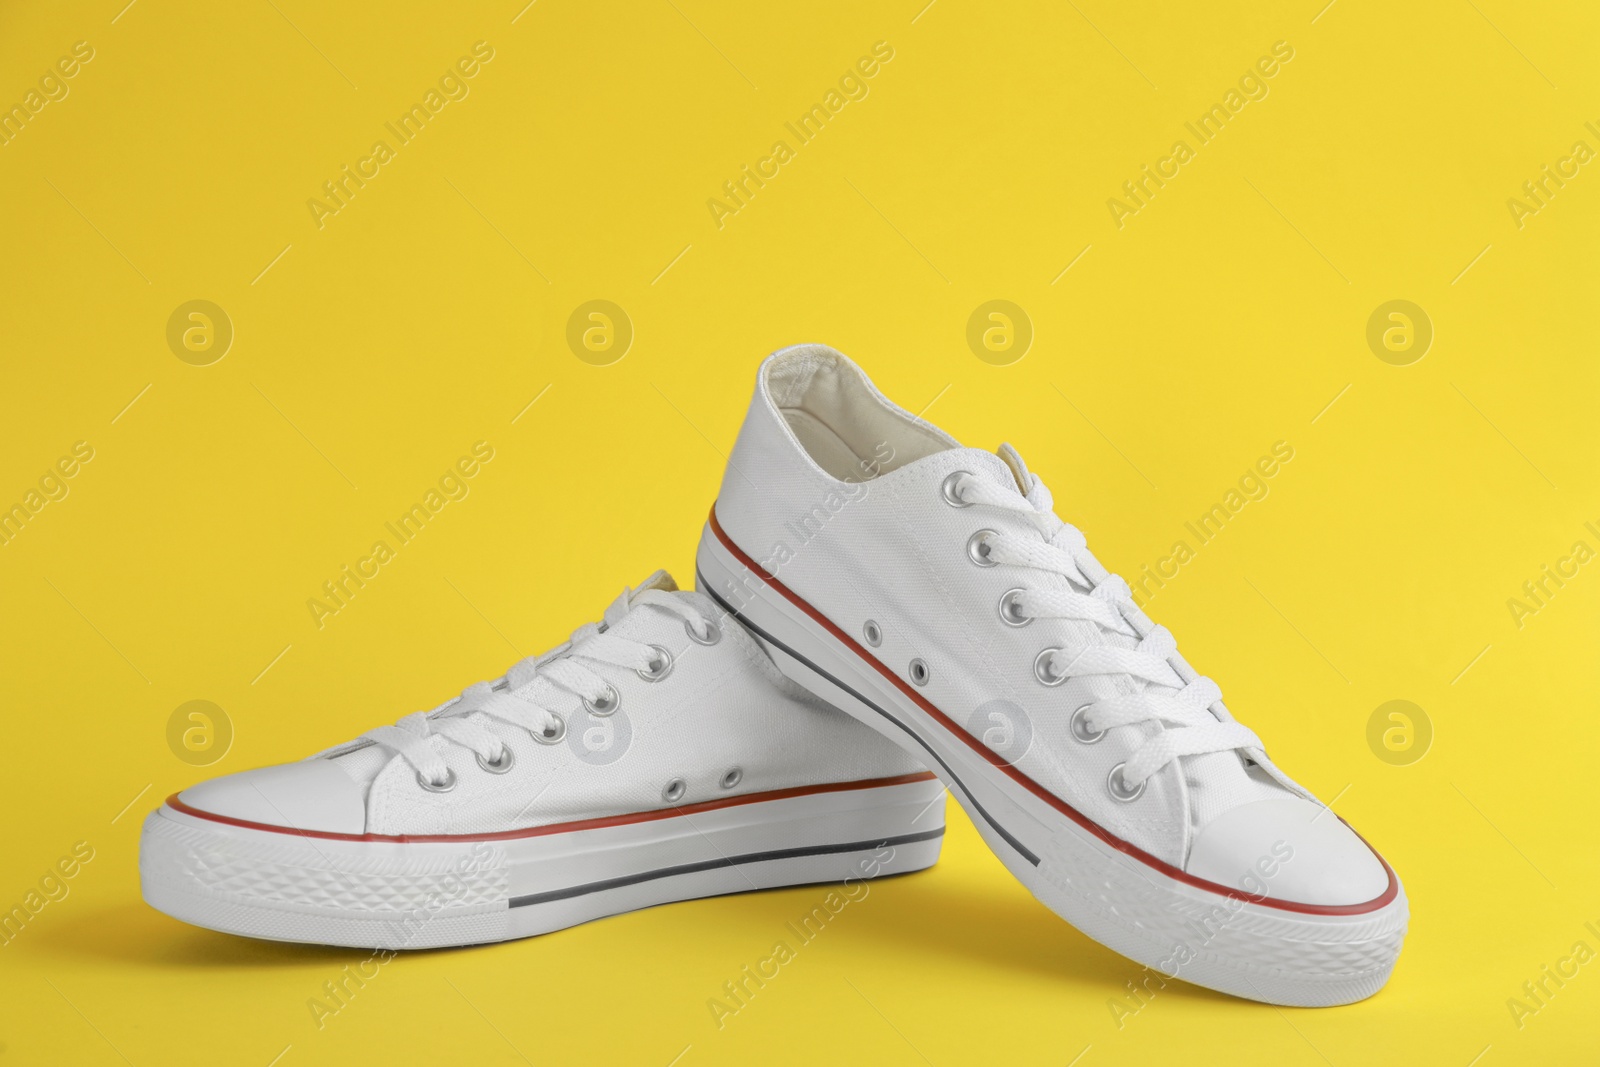 Photo of Pair of stylish sneakers on yellow background